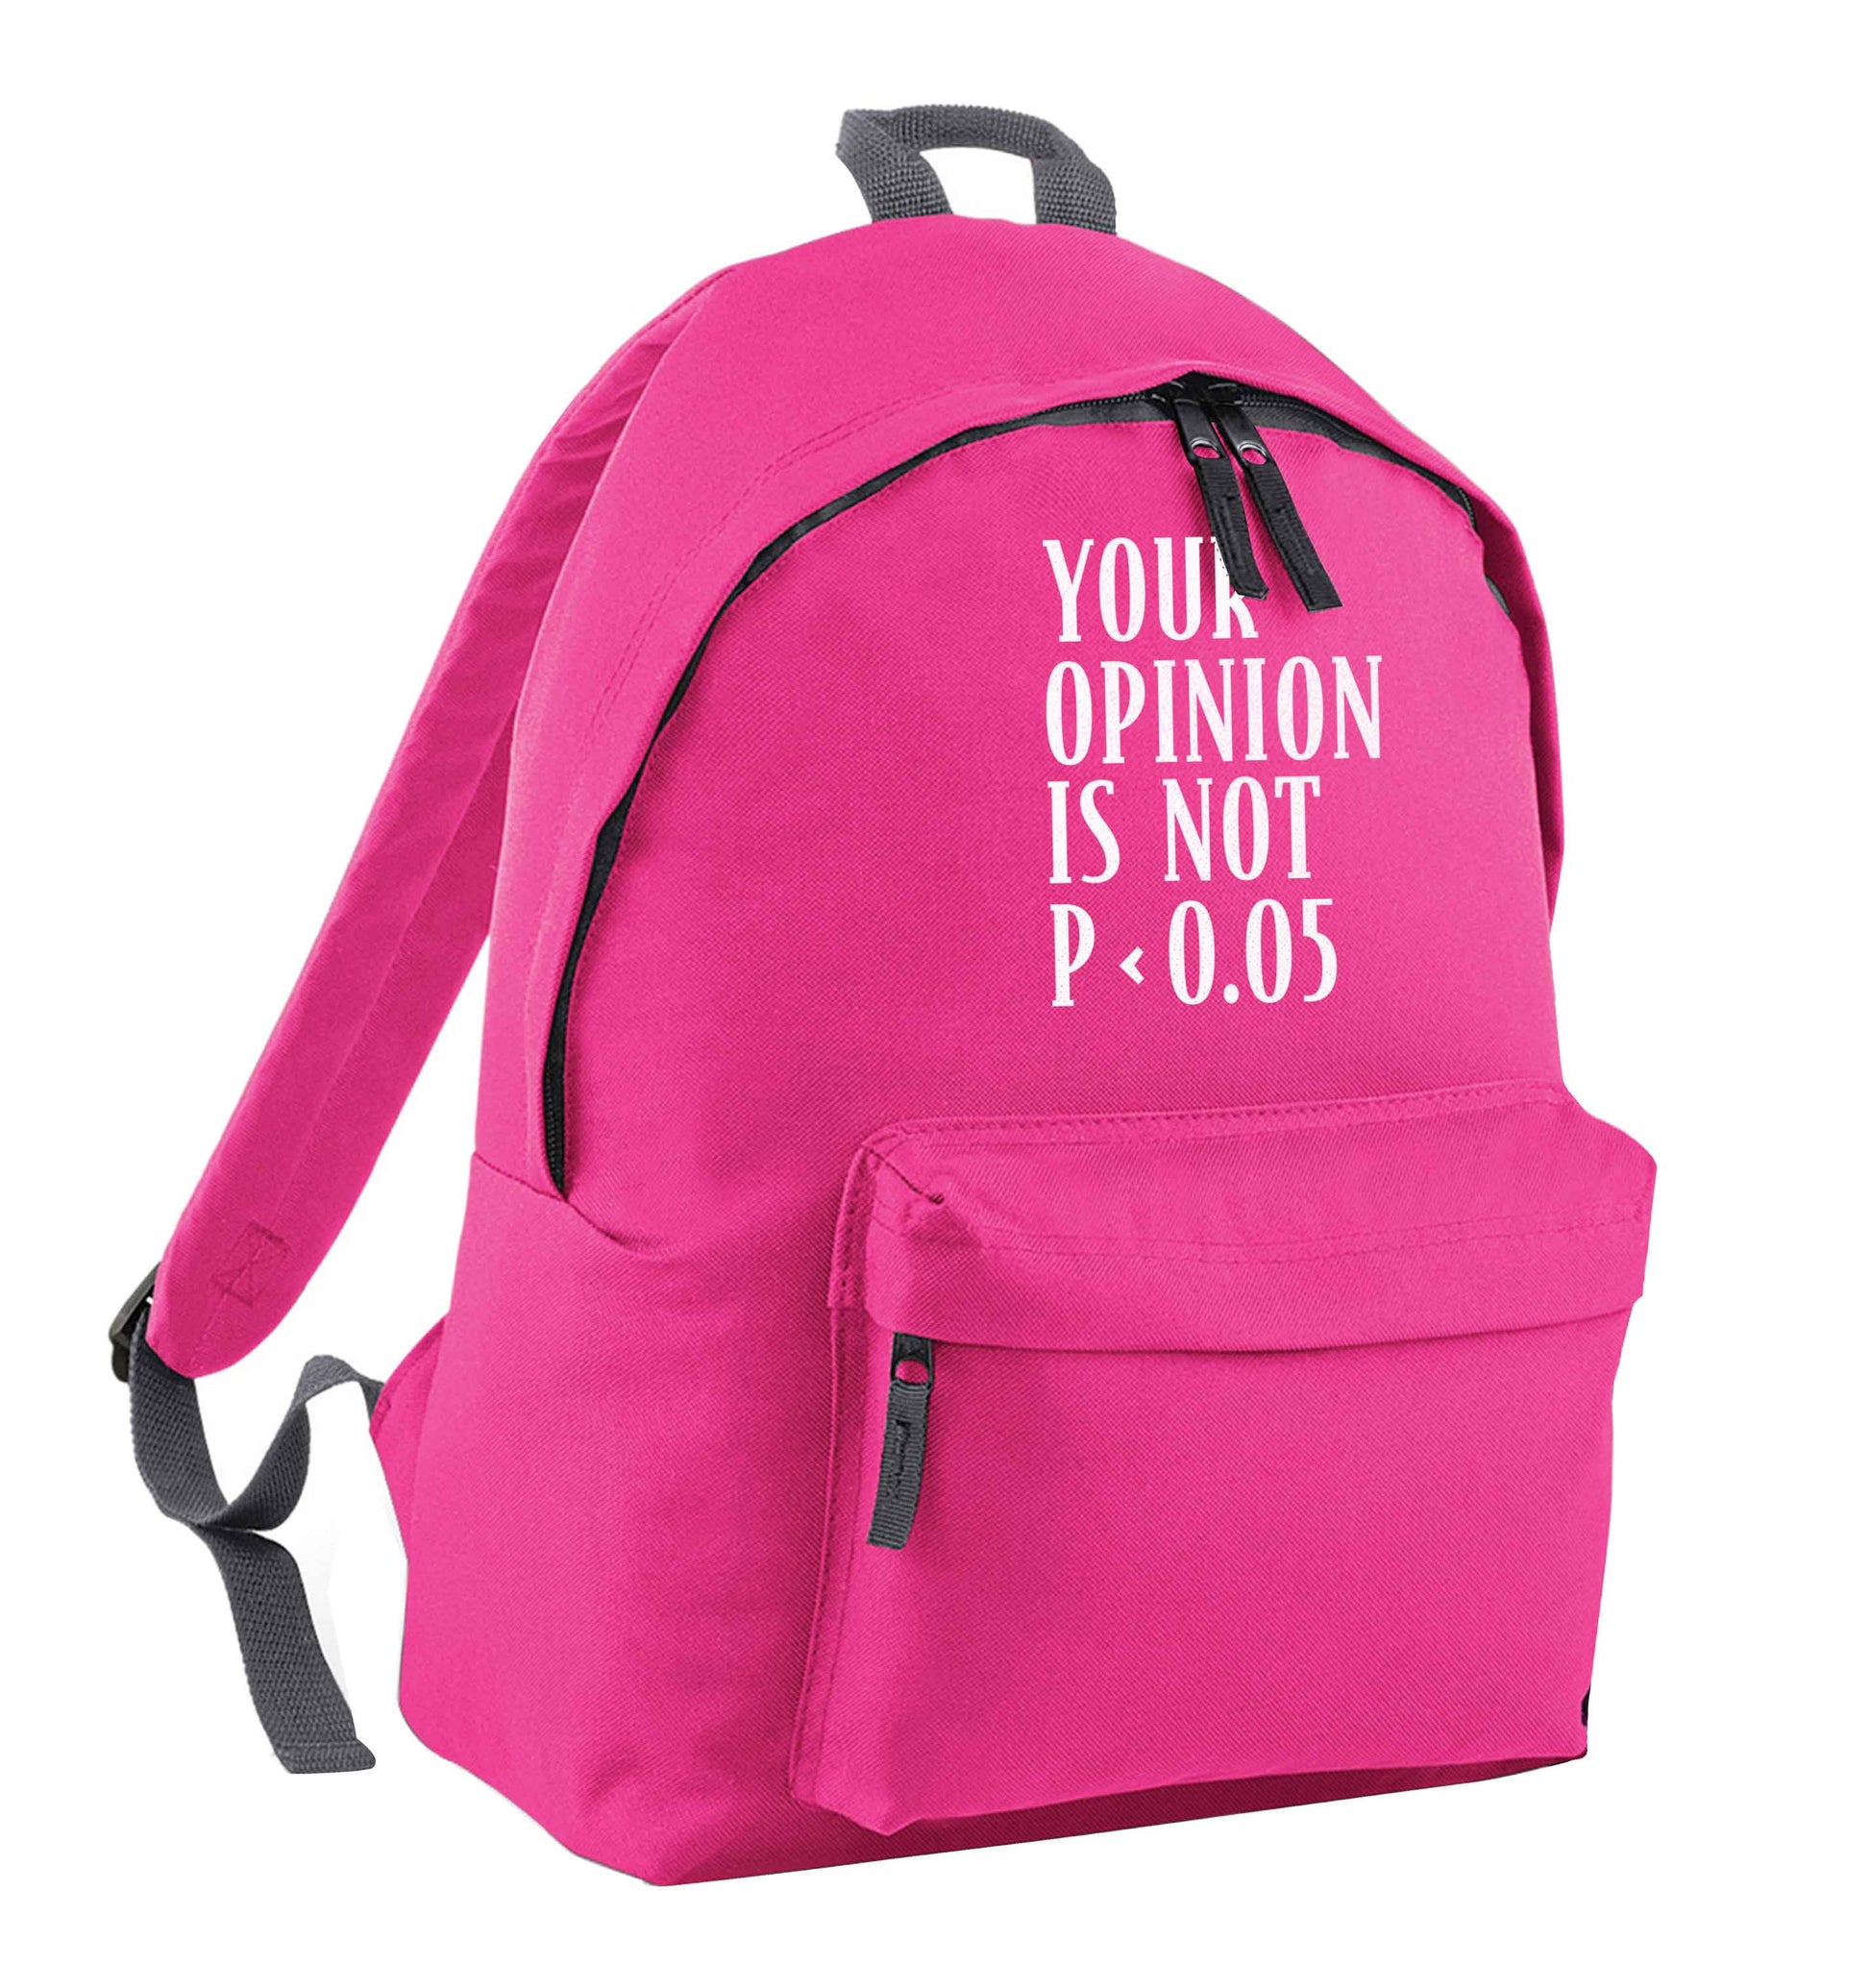 Your opinion is not P < 0.05pink children's backpack